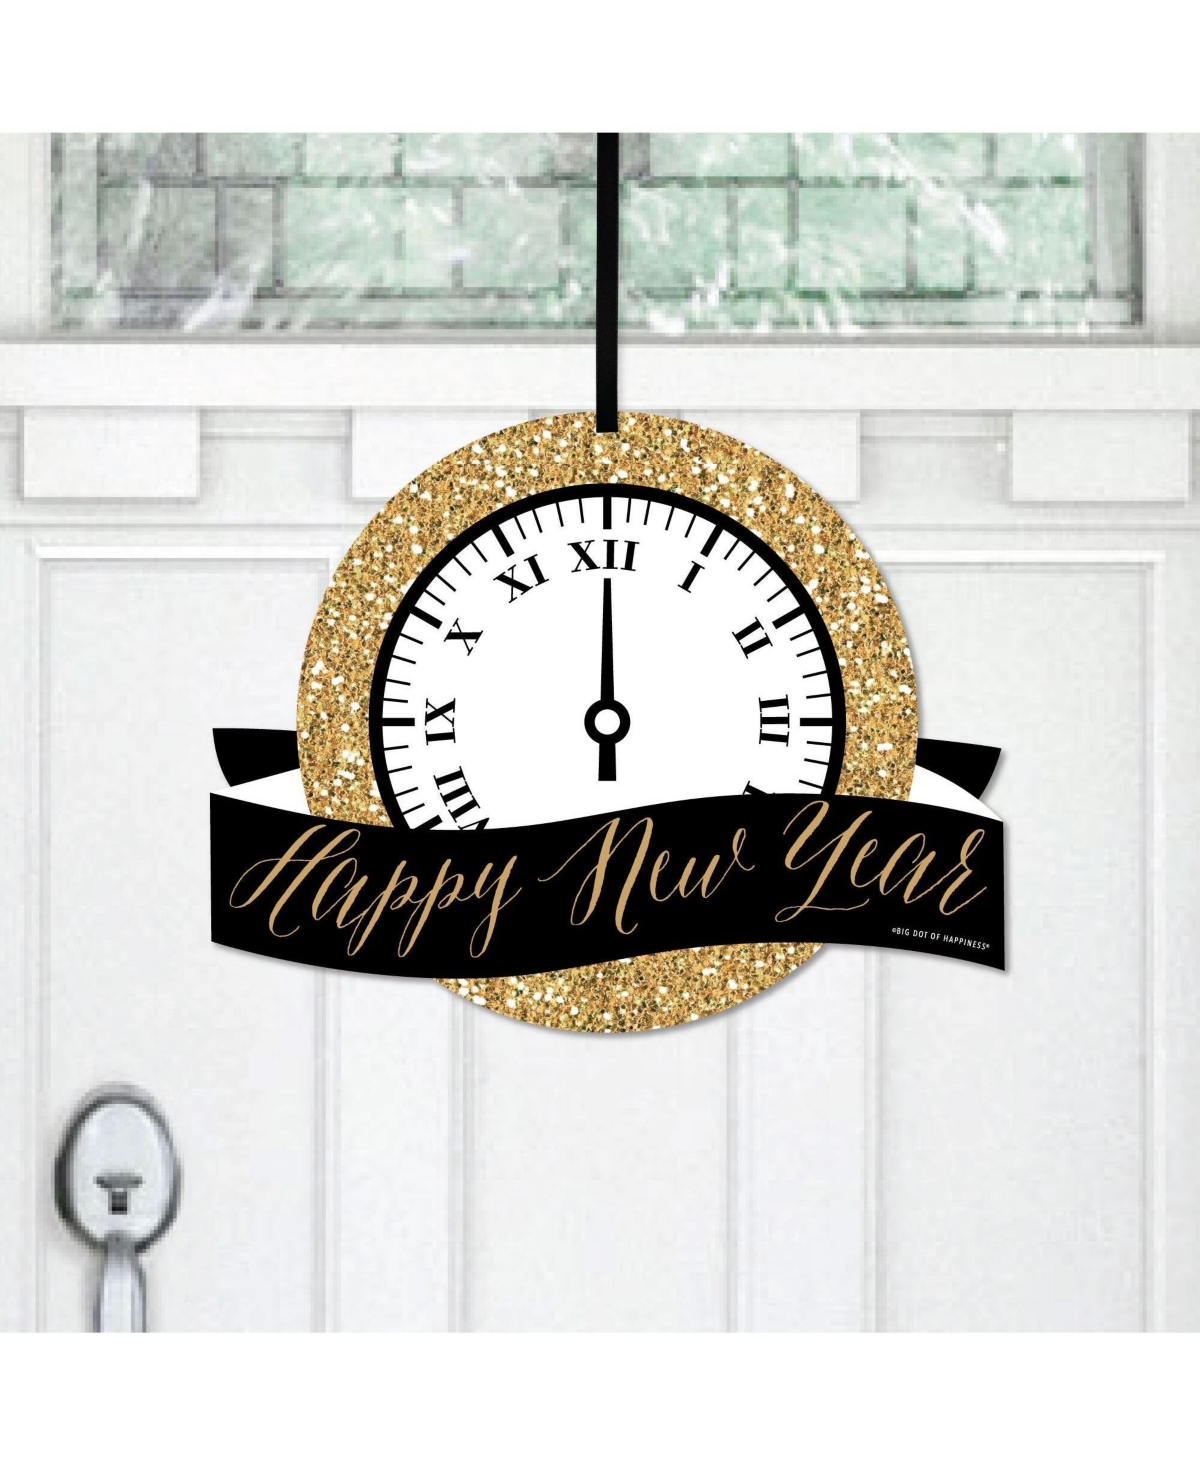 New Years Eve - Gold - Hanging Porch Outdoor Front Door Decor - 1 Pc Sign